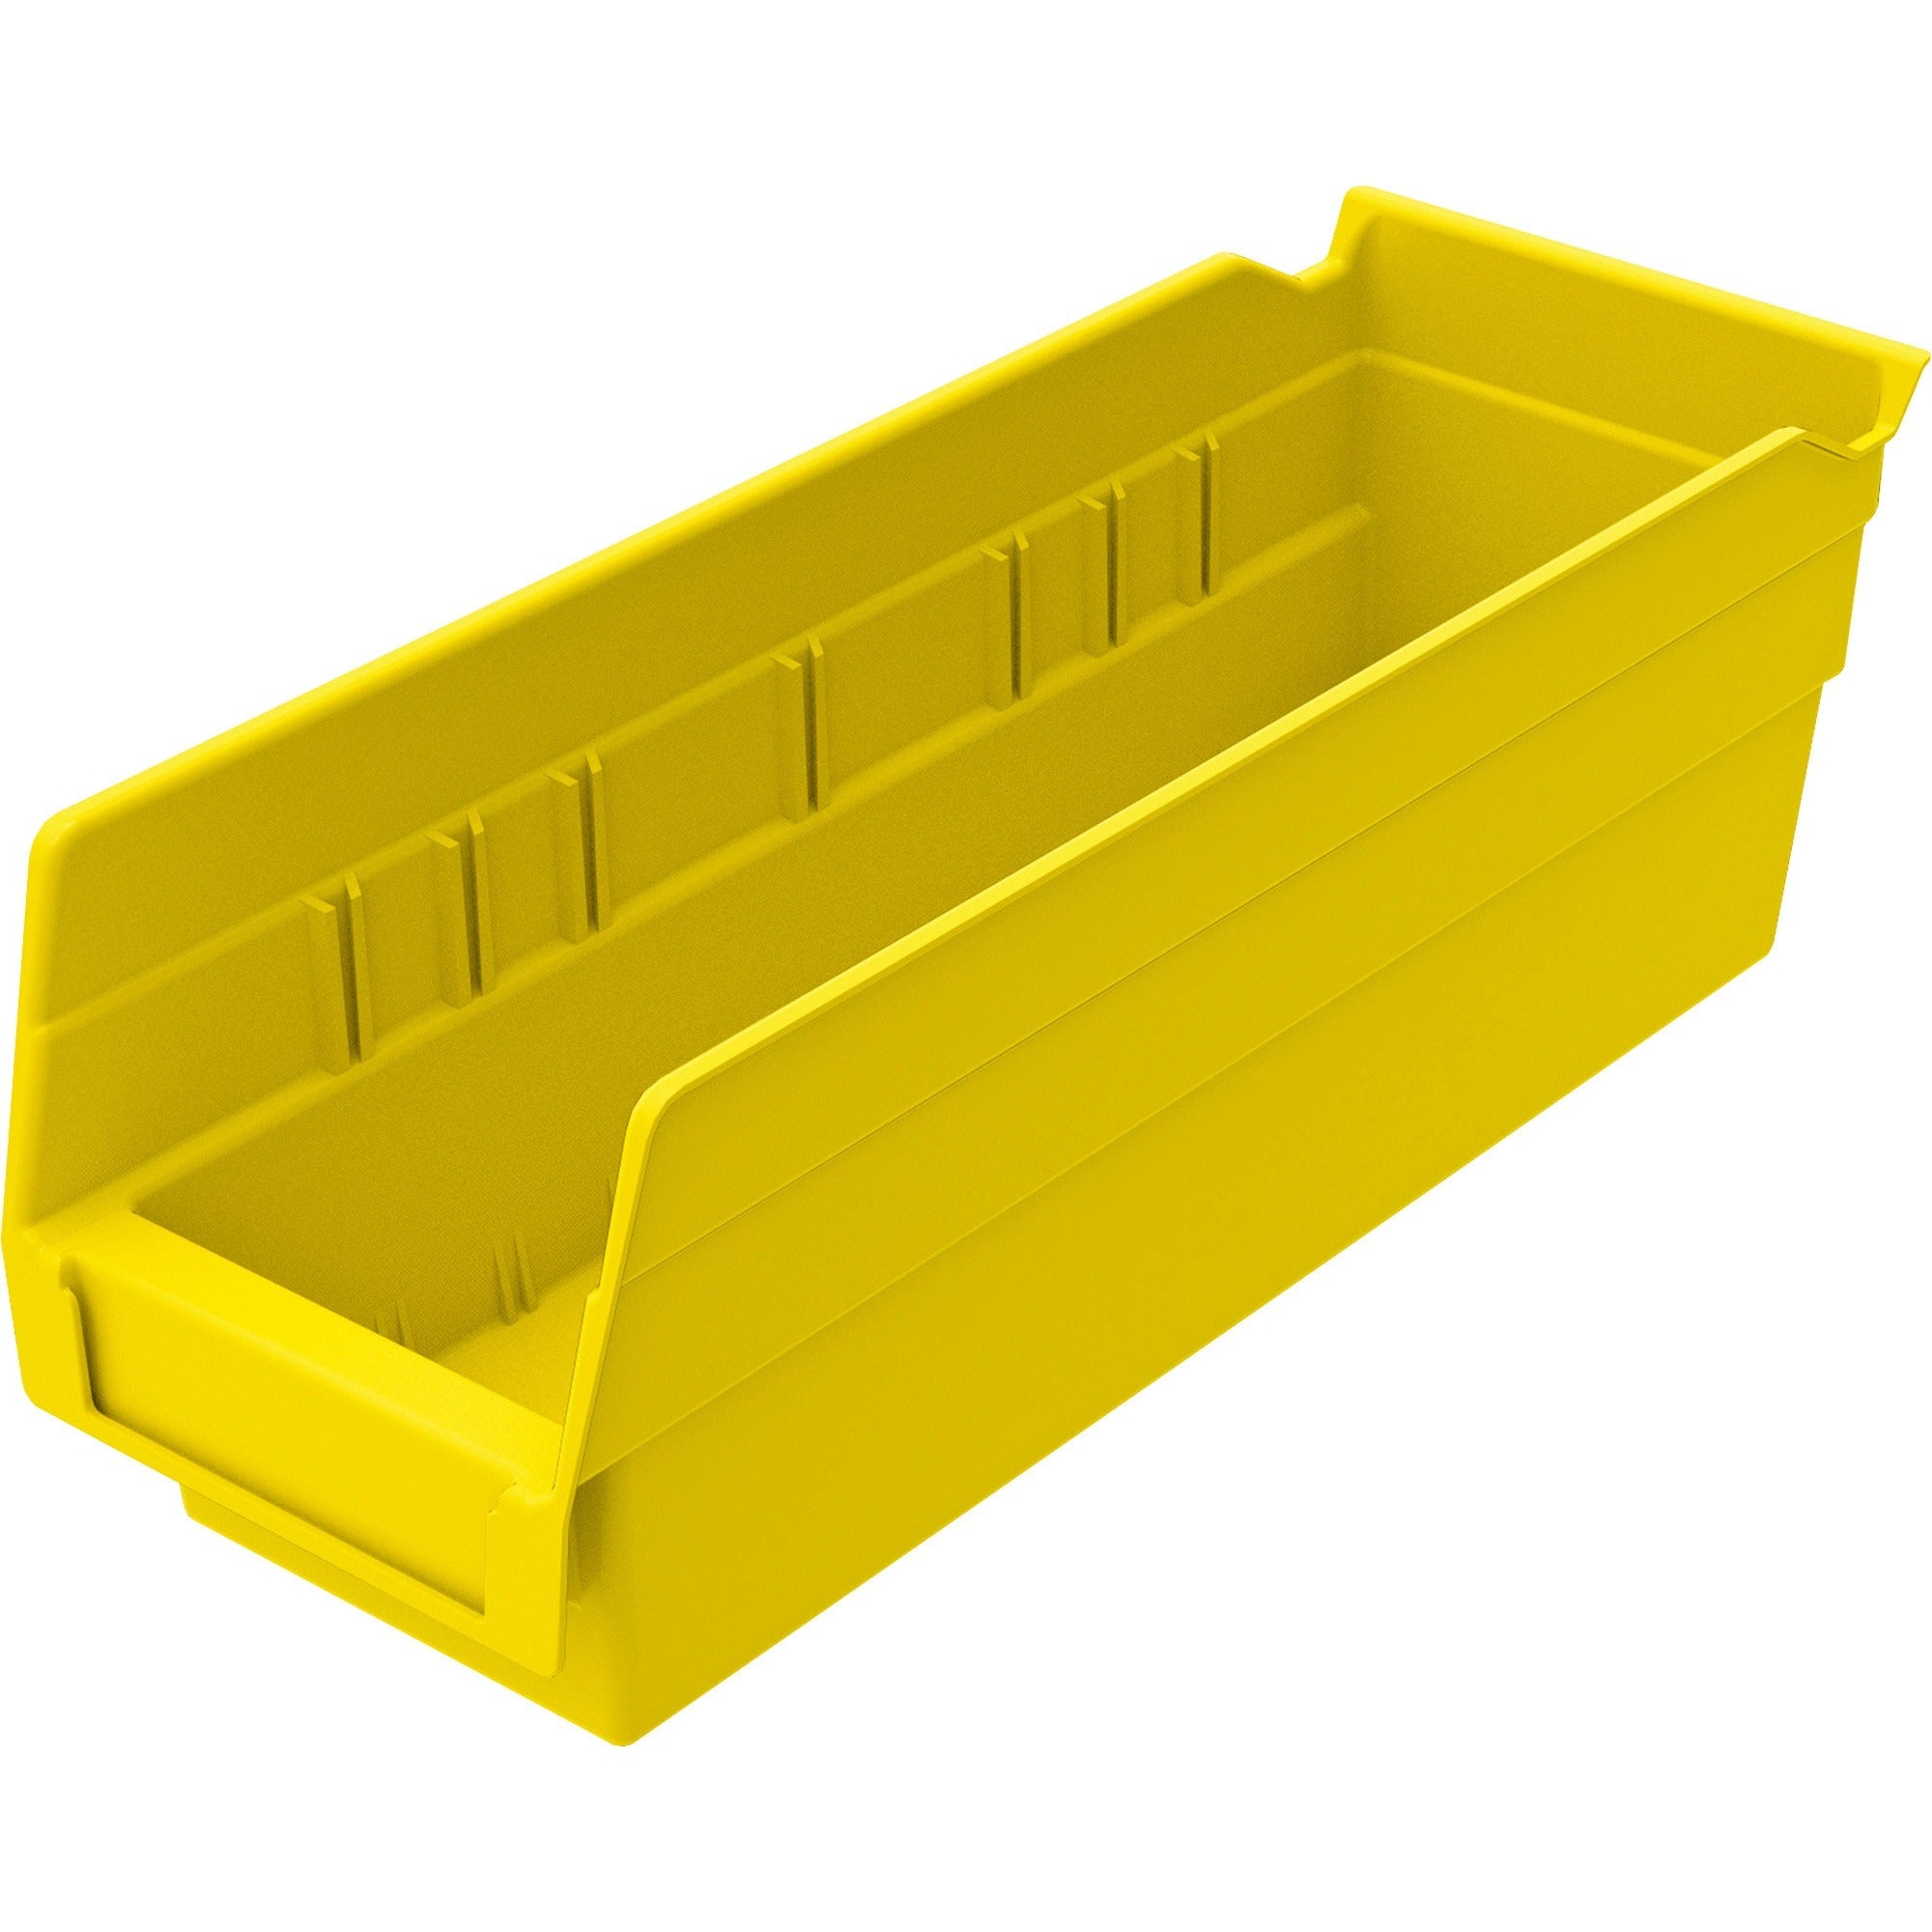 Akro-Mils Economical Storage Shelf Bins - 4" Height x 4.1" Width x 11.6" Depth - Water Proof, Label Holder, Durable, Stain Resistant, Grease Resistant, Oil Resistant - Yellow - Polymer - 1 Each